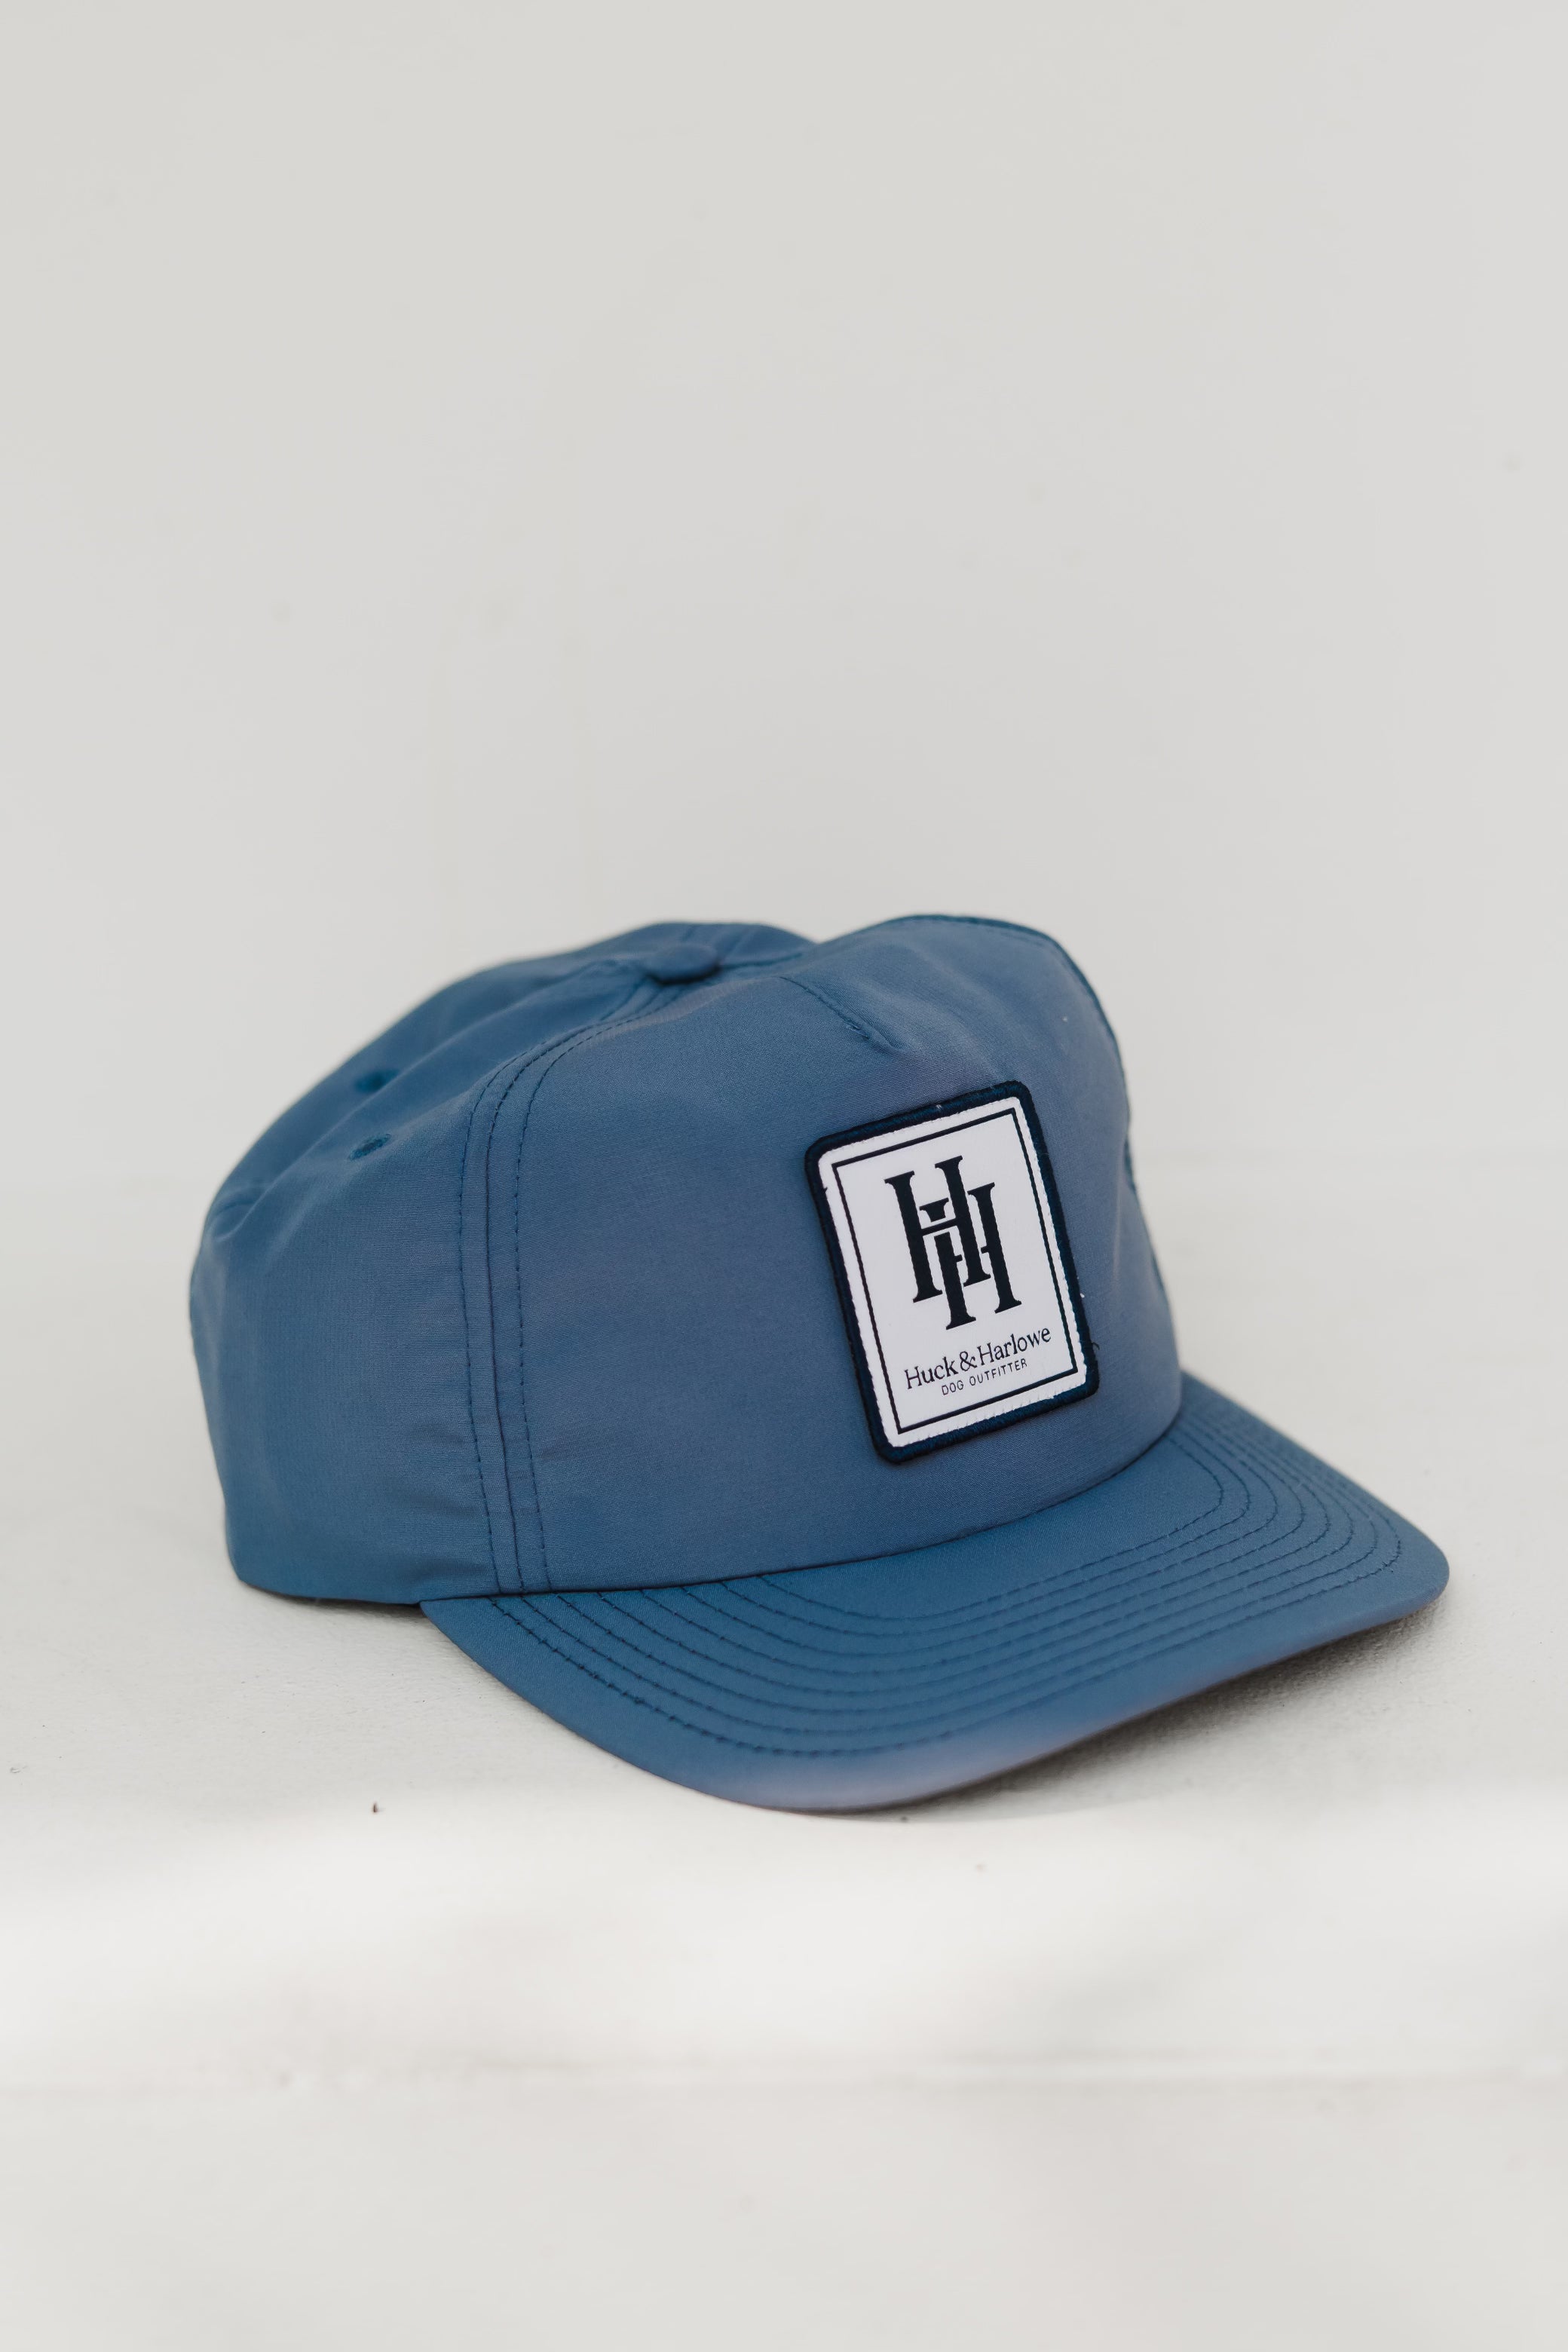 H&H Dog Outfitter Patch Hat